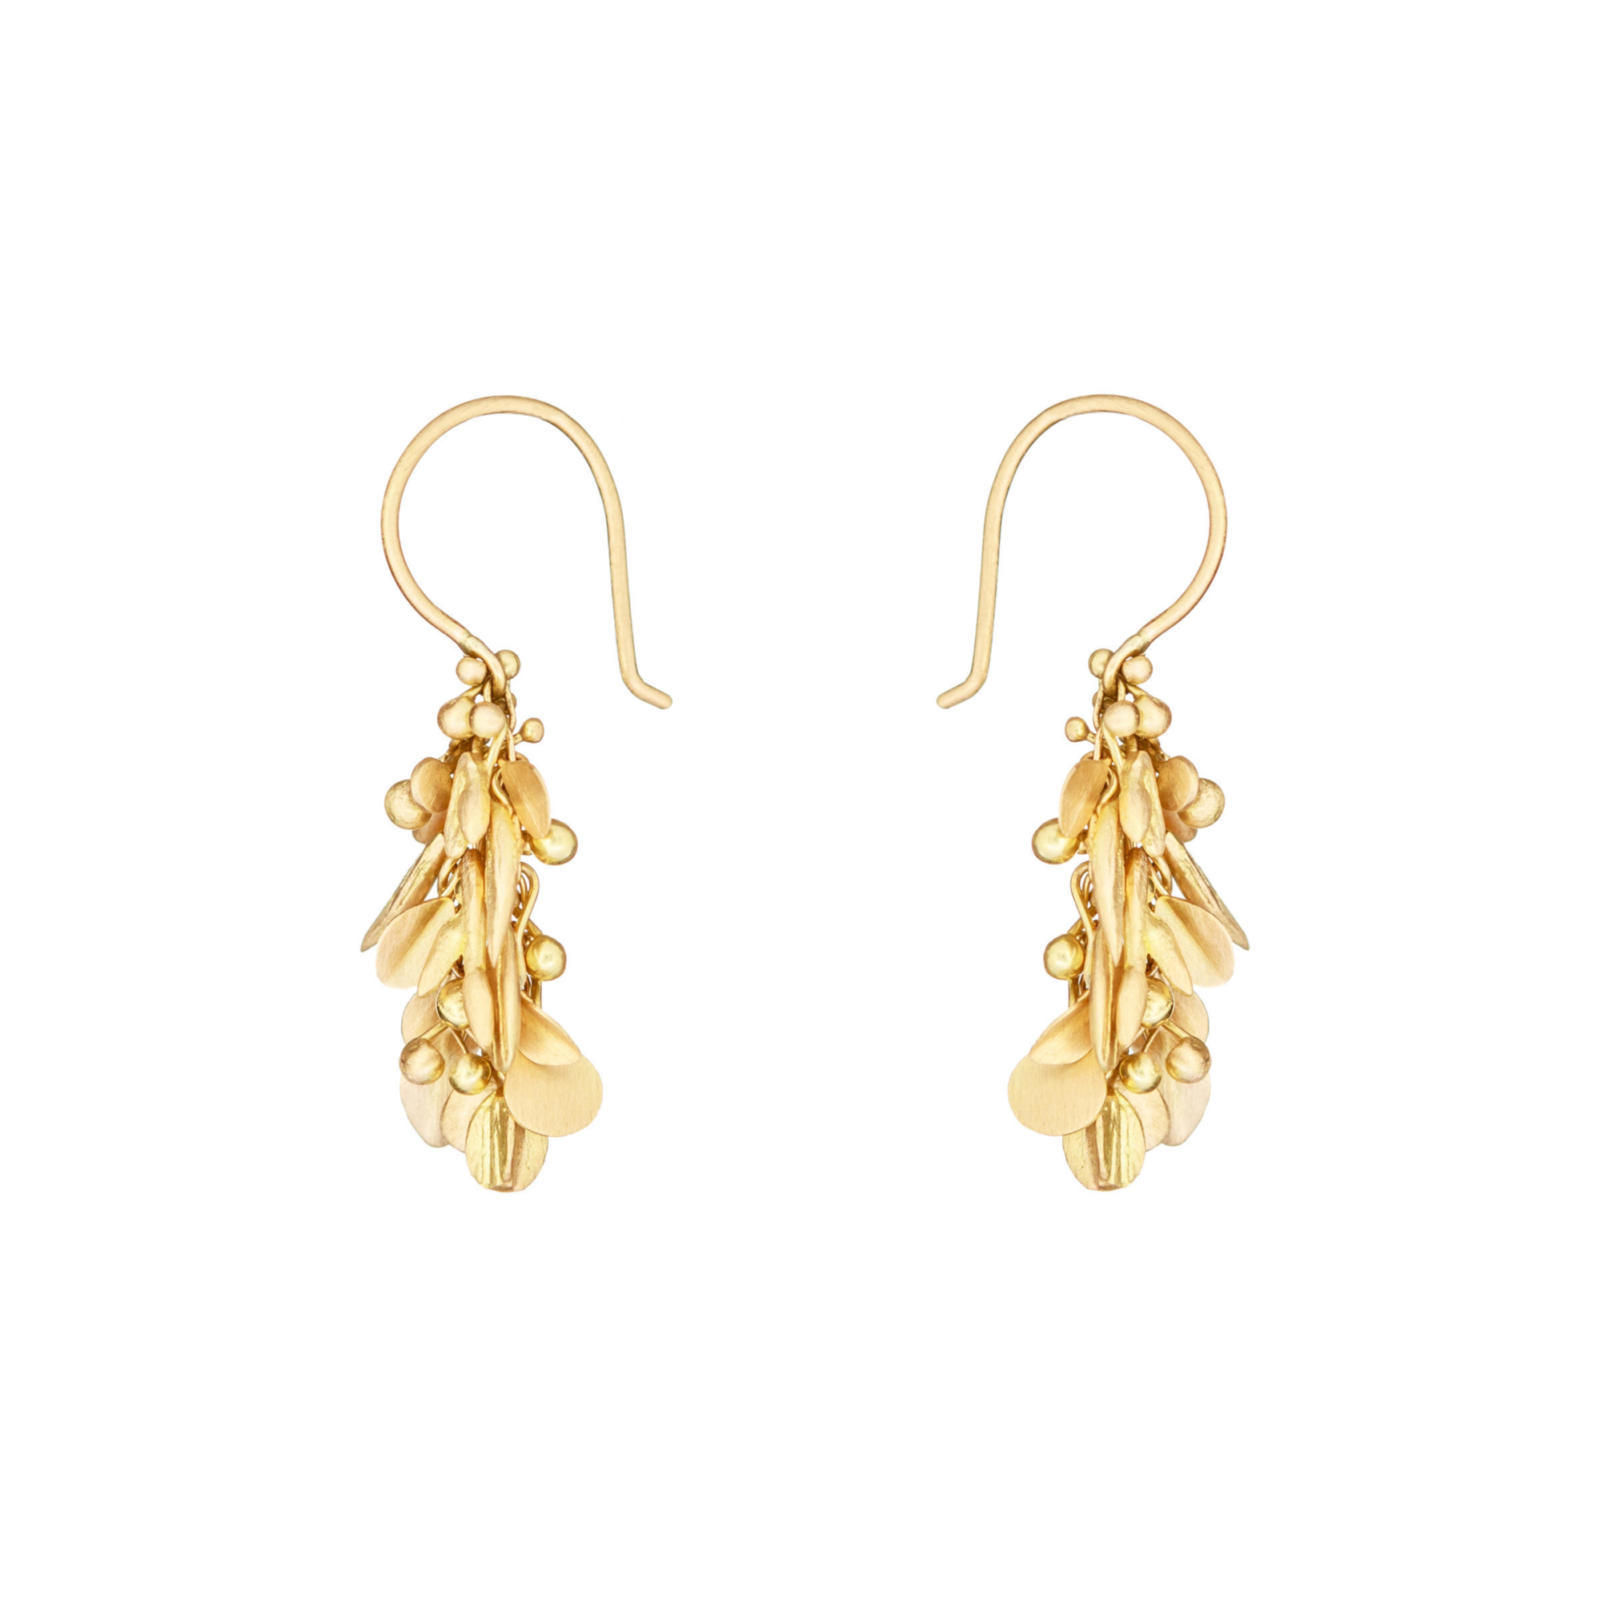 Sia Taylor ME4 Y Yellow Gold Earrings S